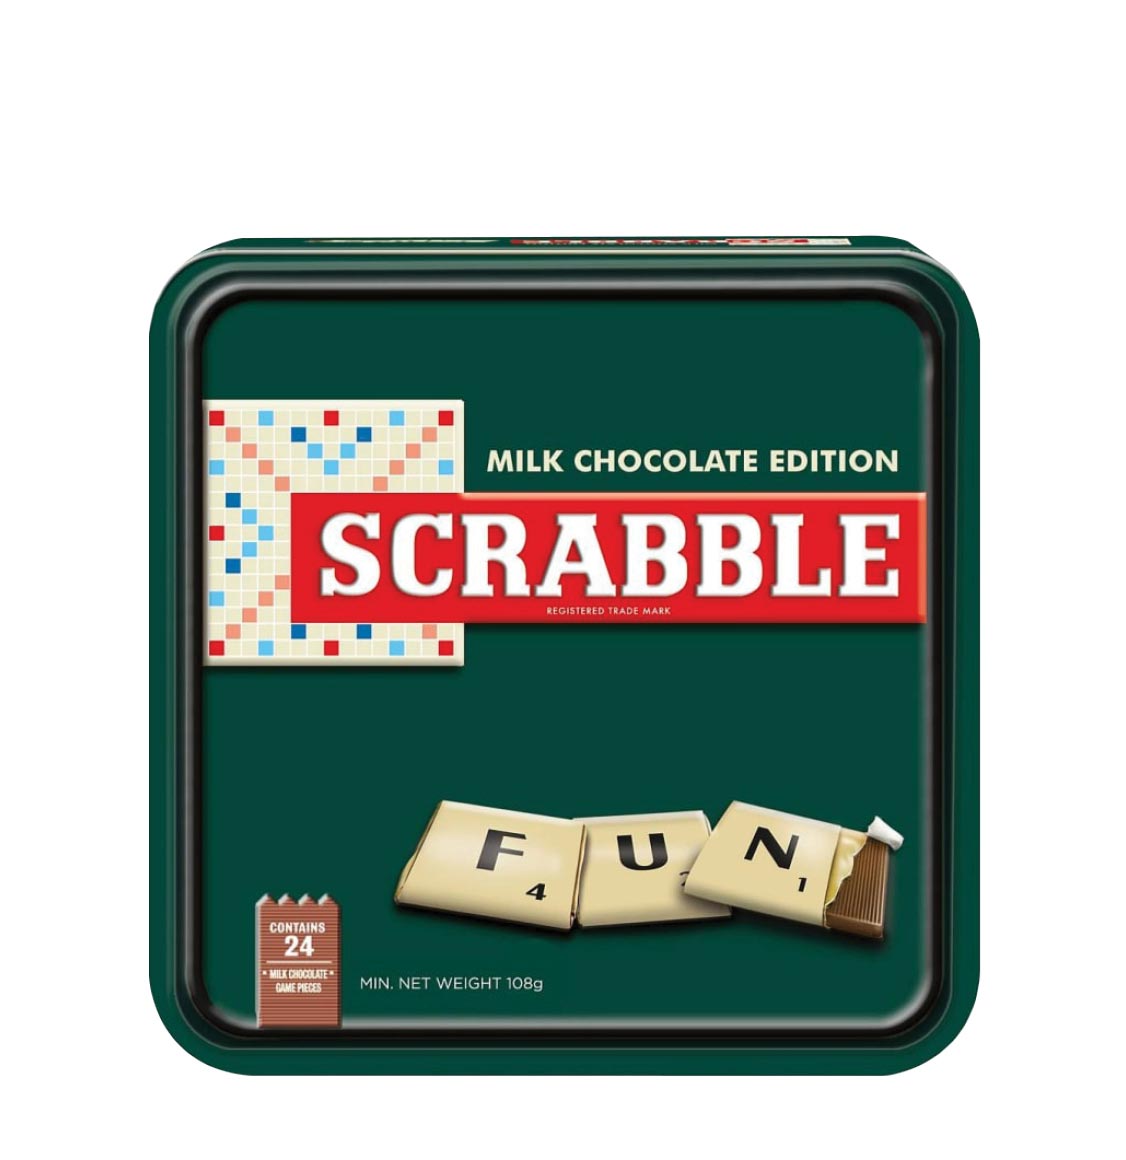 Scrabble Belgian Milk Chocolate Game In Luxury Tin Can Edition 108g-A